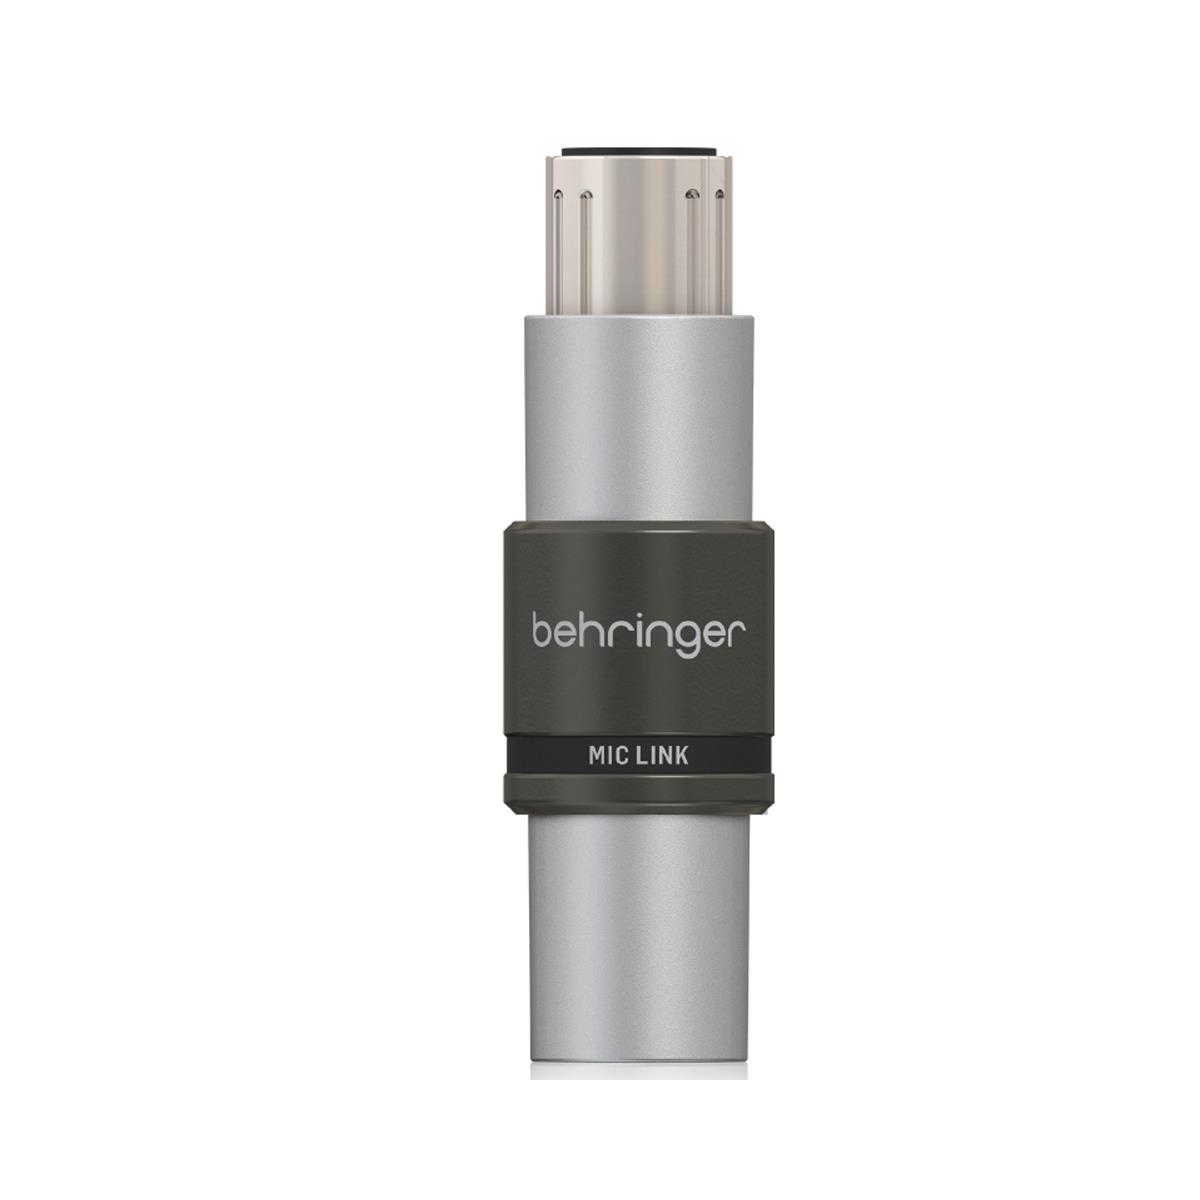 Image of Behringer MIC LINK Dynamic Compact Microphone Booster with Preamp